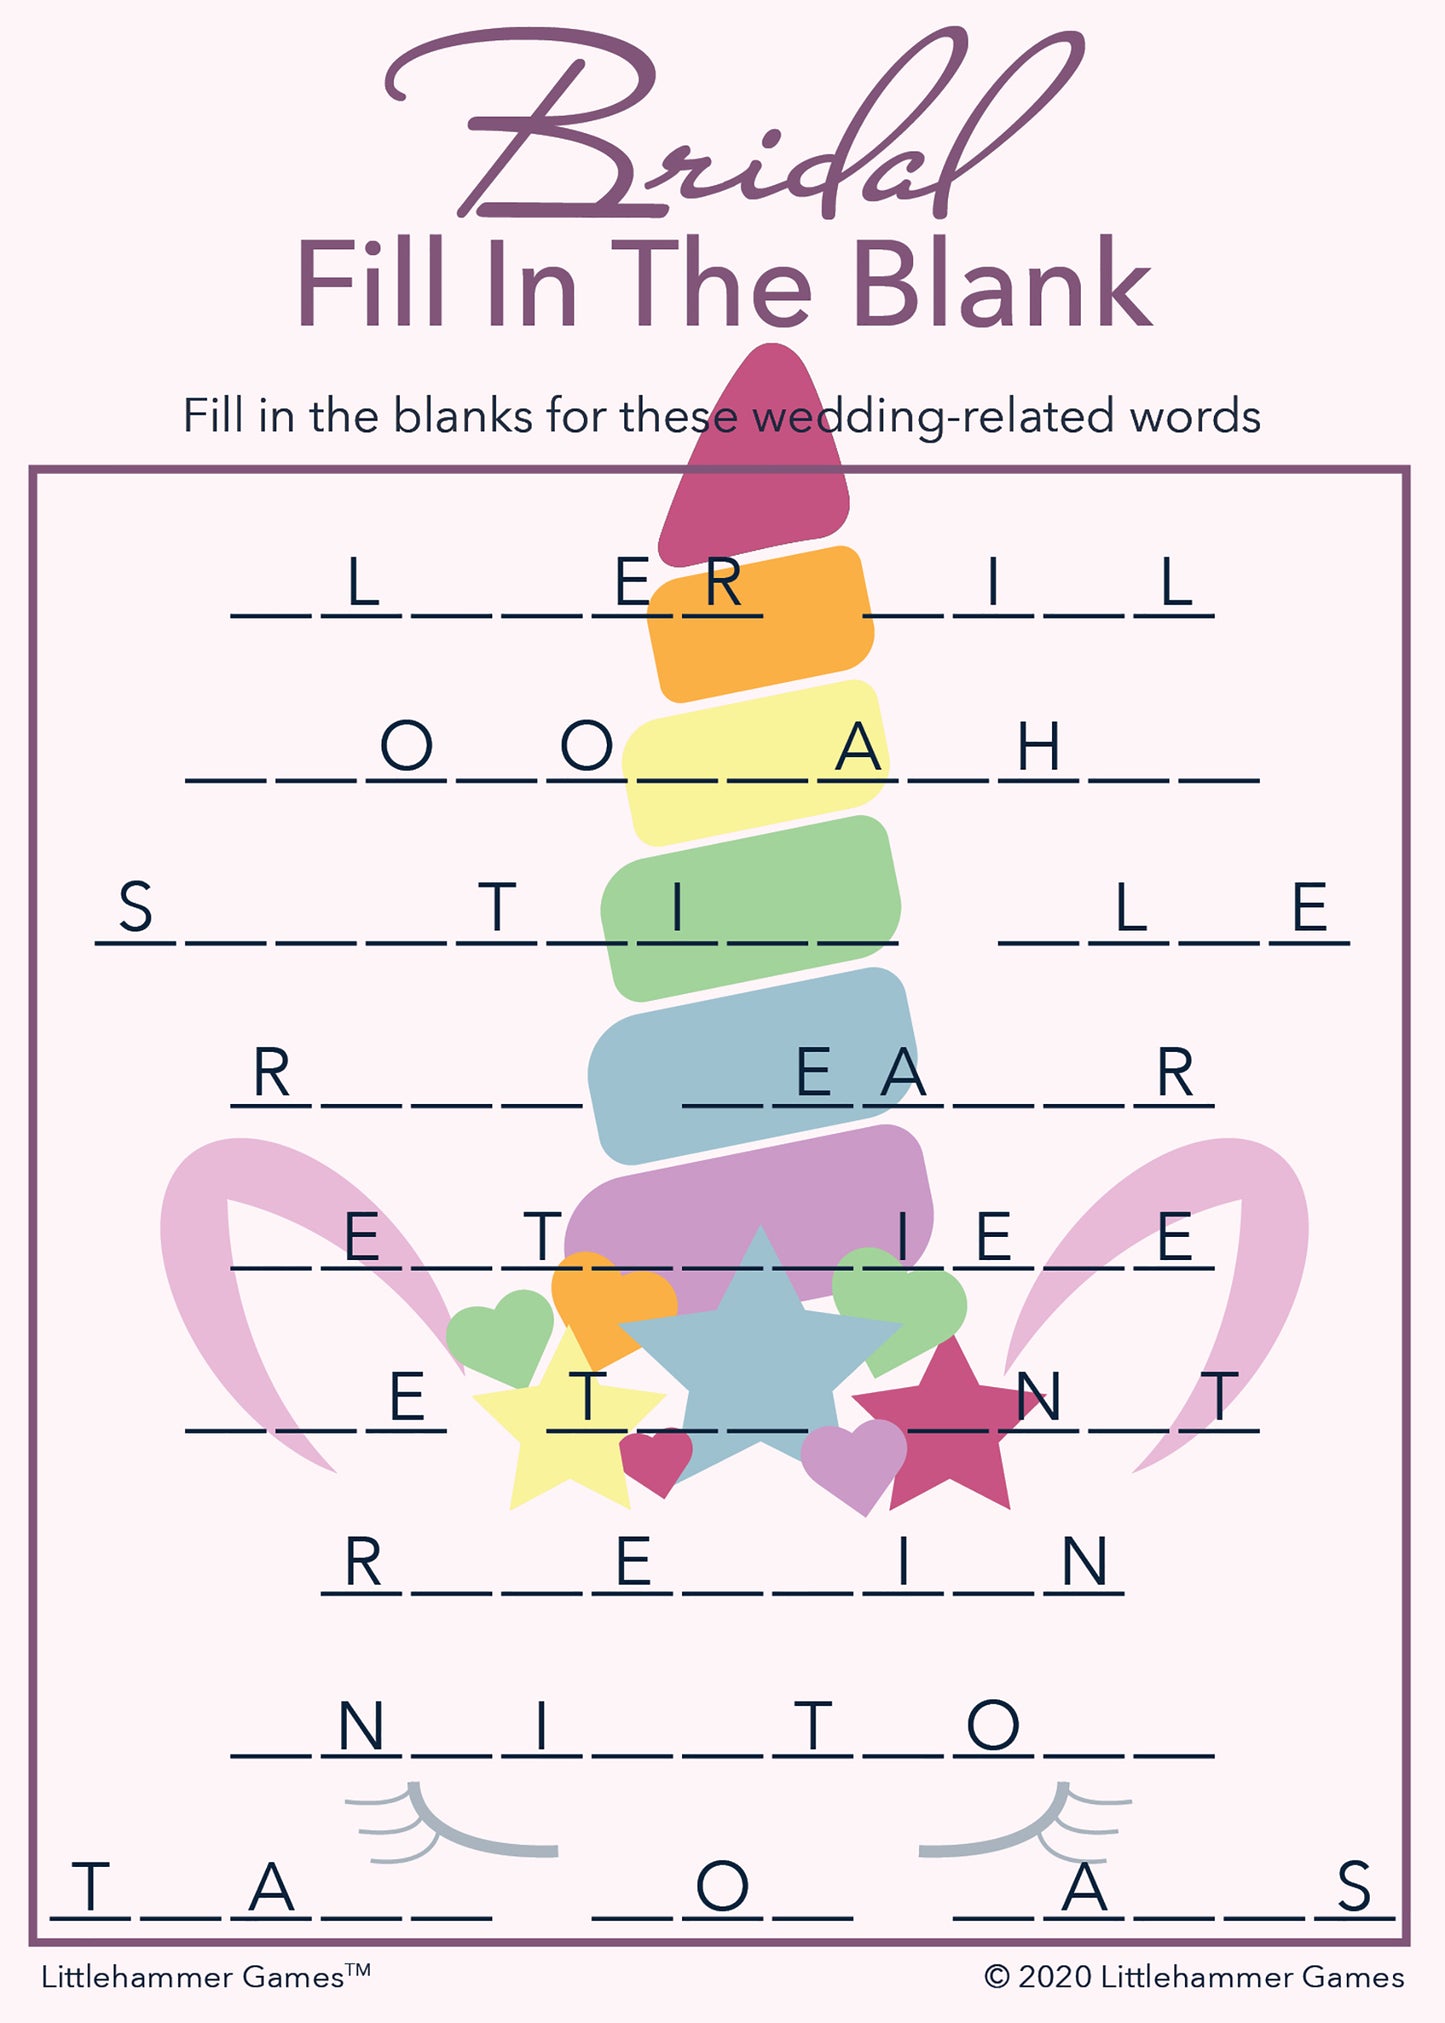 Bridal Fill in the Blank game card with a unicorn background